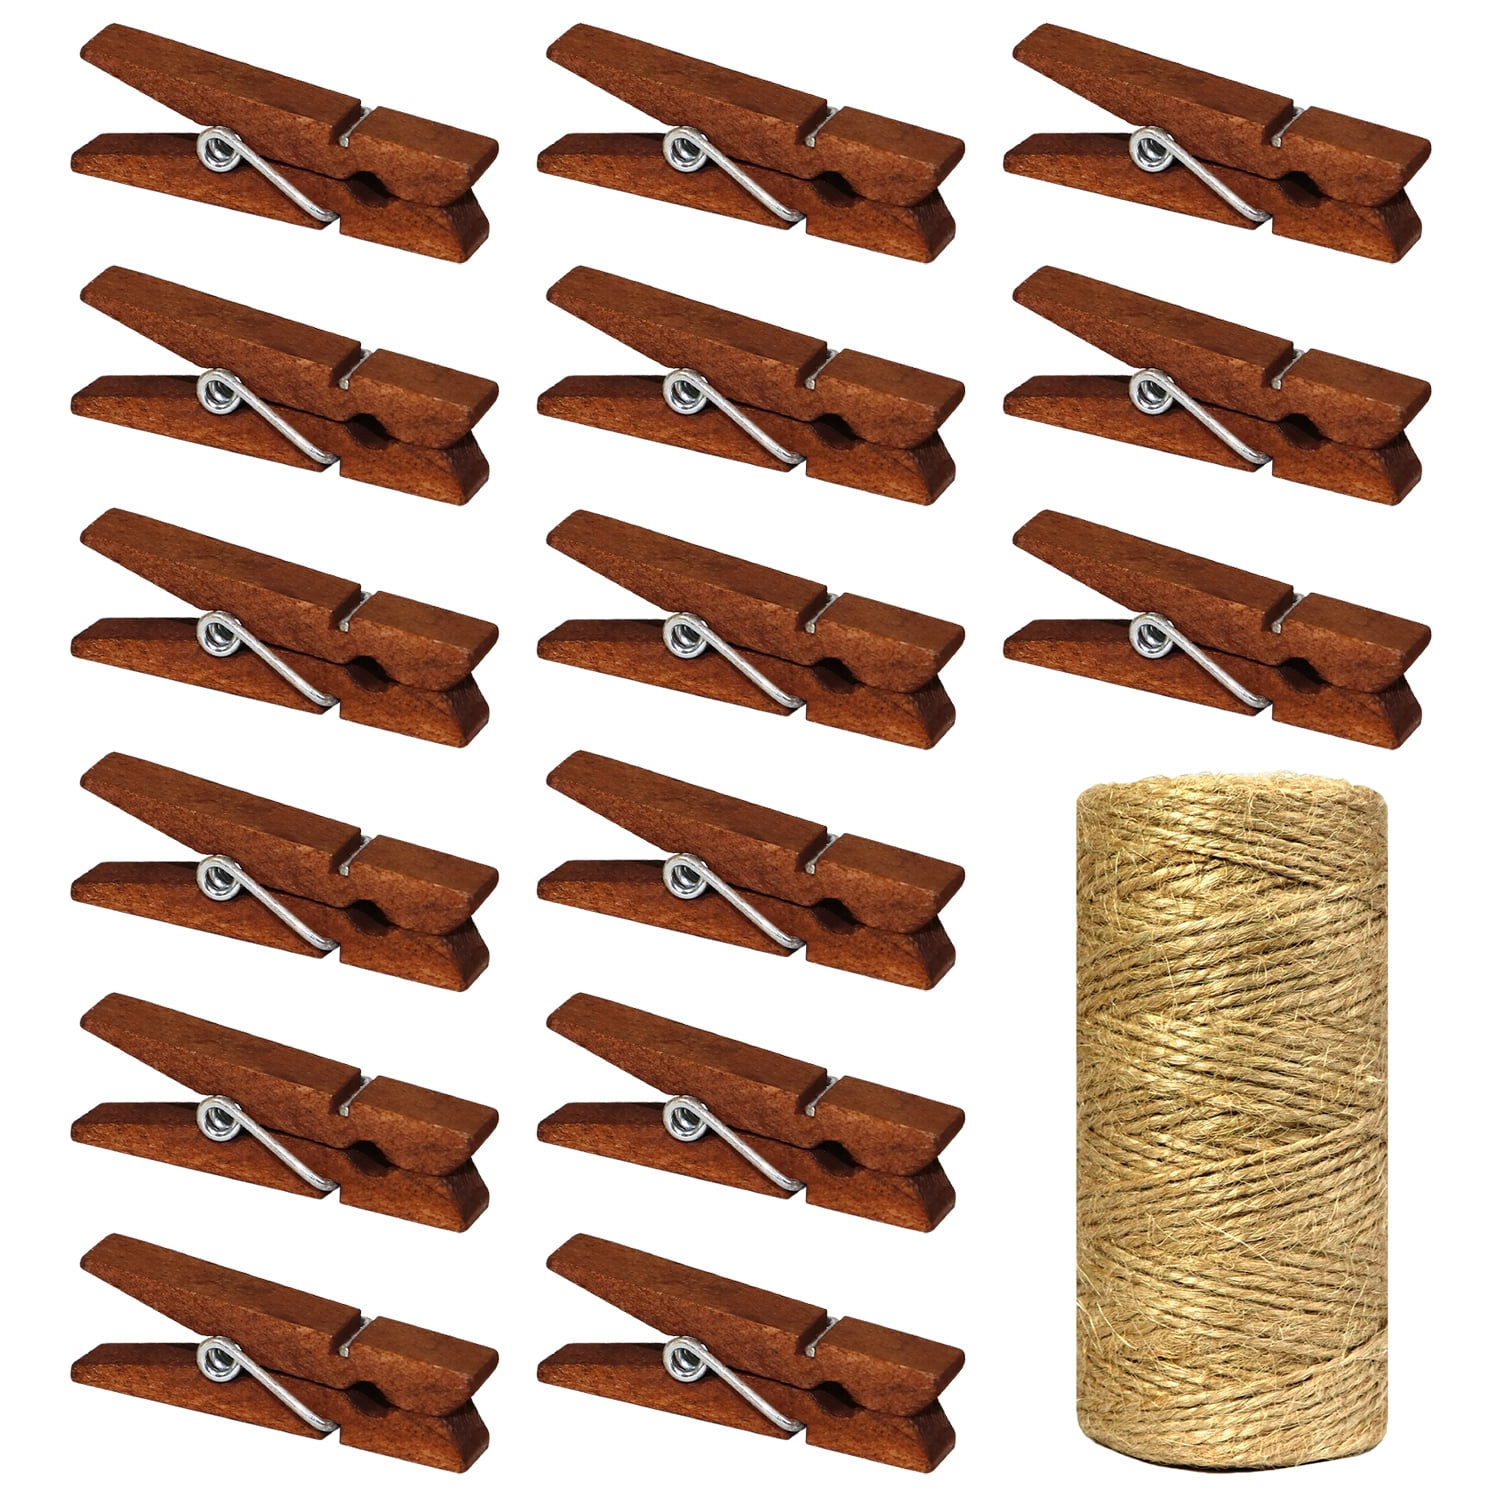 Wooden Clothes Pin Clips 2 inch at CraftySticks Outlet